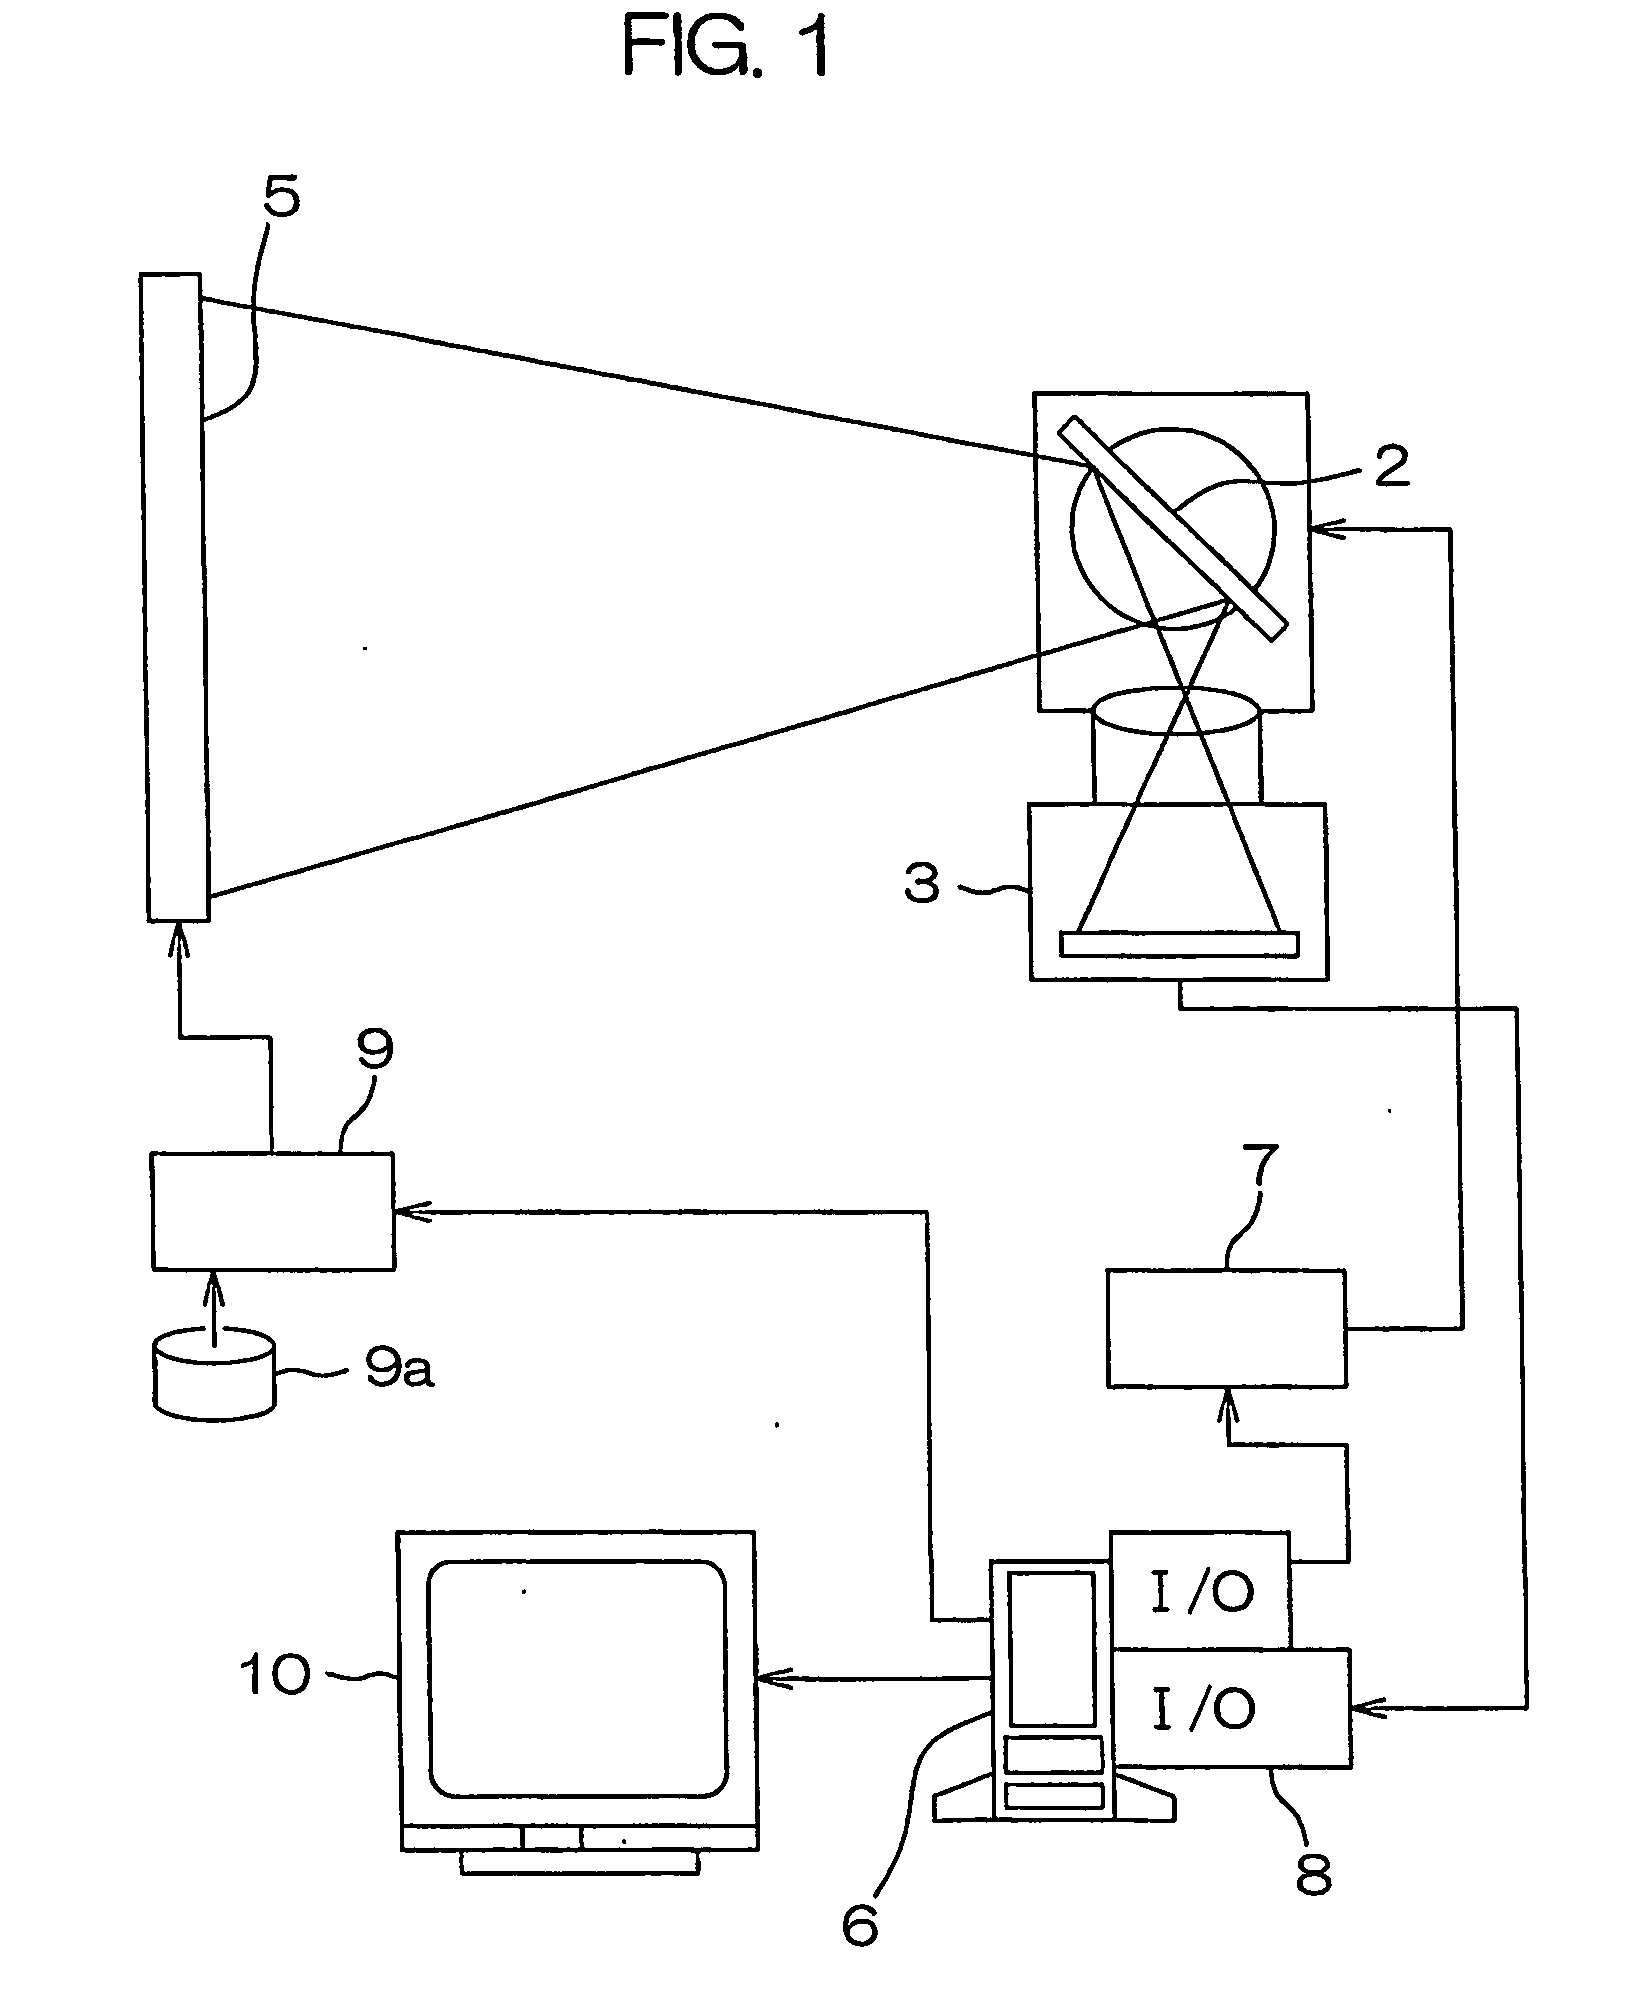 Method and system for evaluating moving image quality of displays